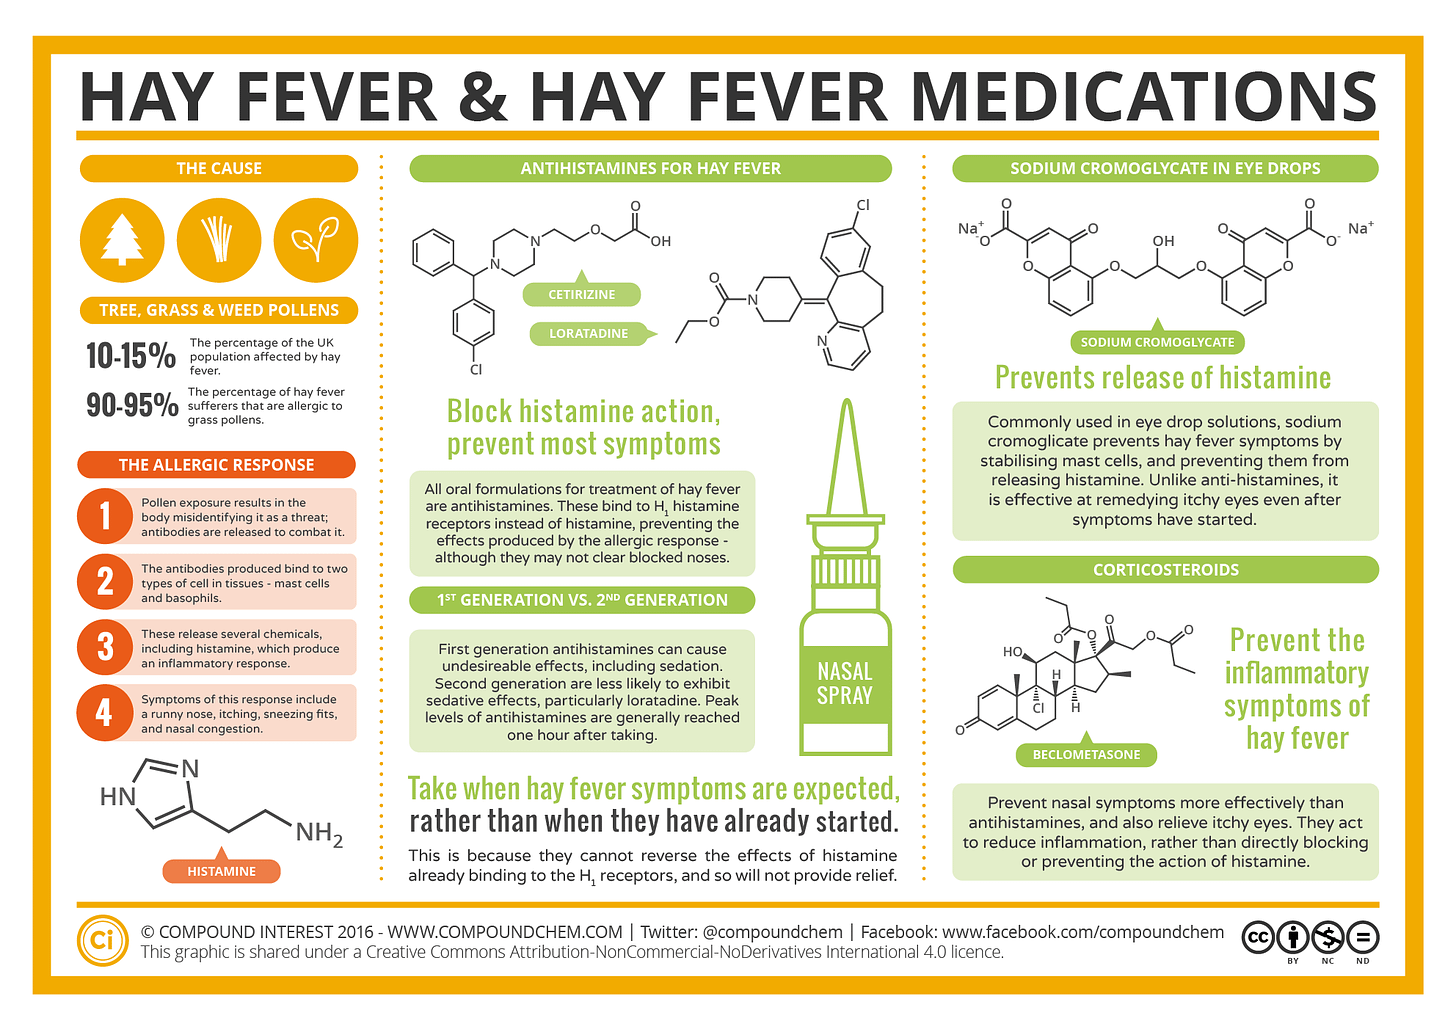 Infographic on hay fever and hay fever medications. The first column explains how plant pollen causes an inflammatory response, resulting in the release of histamine which causes hay fever symptoms. The second column focuses on antihistamines, medicines which block histamine action in the body and prevent most symptoms. The third column focuses on preventative medications, which prevent release of histamine, and corticosteroids which act on the inflammatory symptoms.